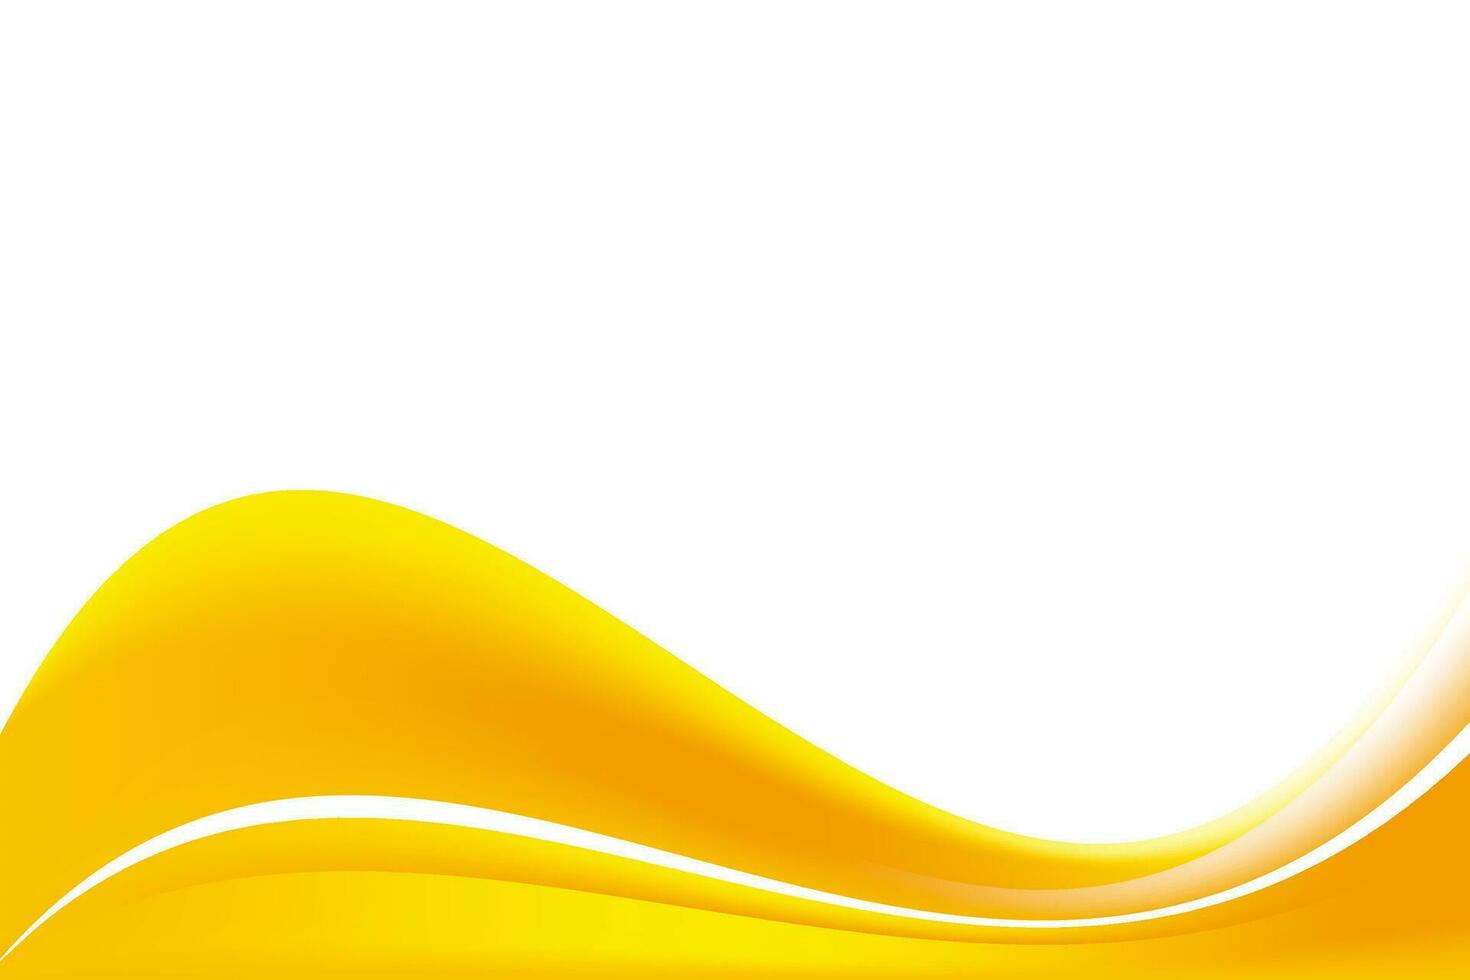 Smooth Yellow Wavy Background Design vector